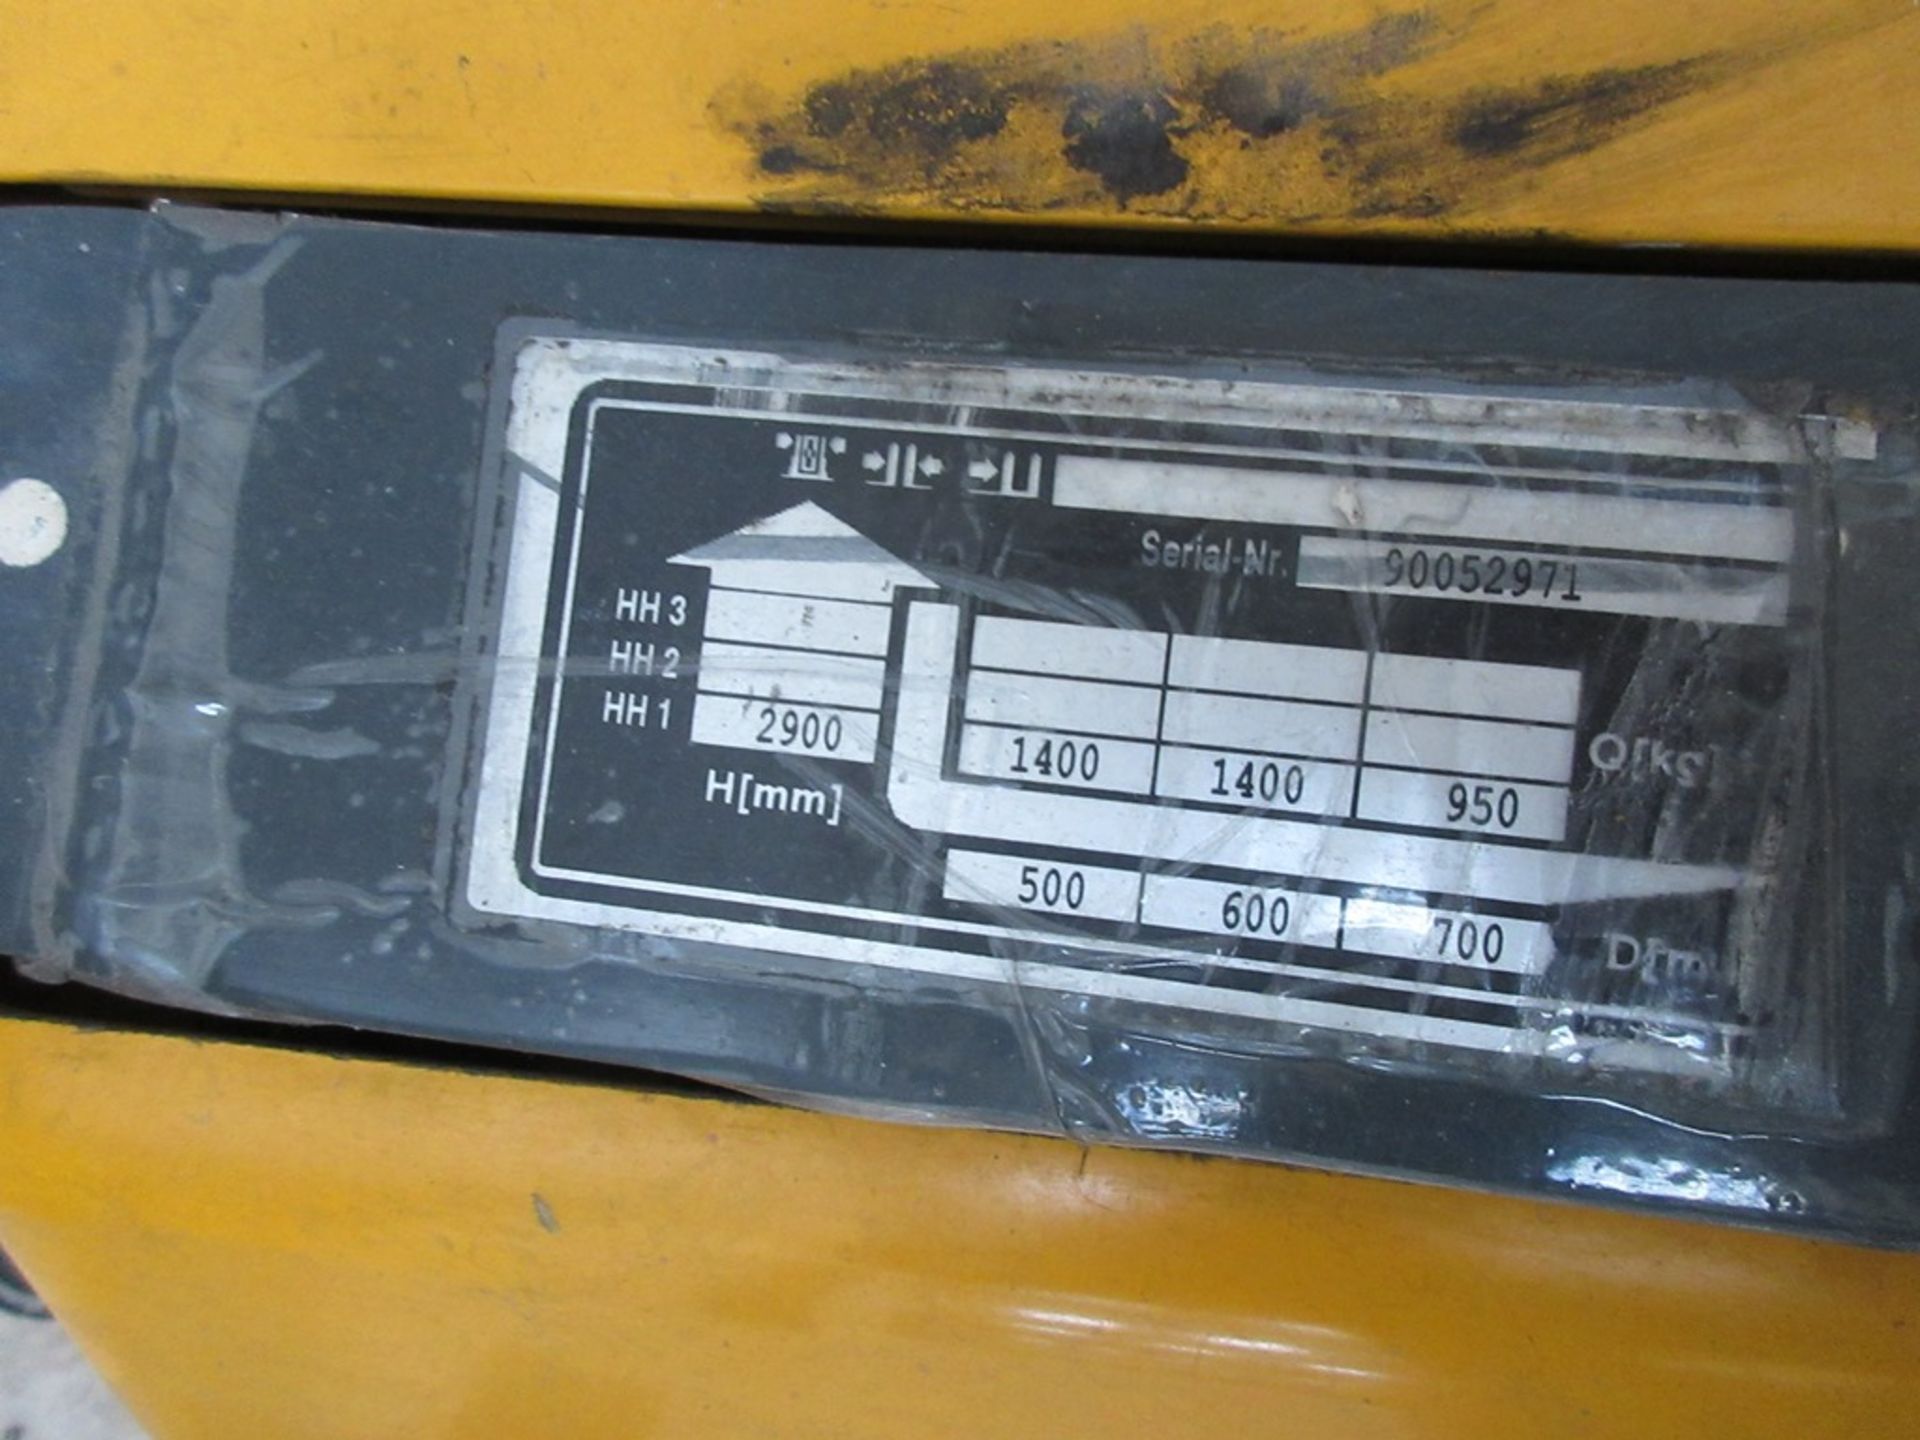 Jungheinrich EJB14 battery operated pedestrian forklift and charger, serial no. 90052971 (2002), - Image 5 of 7